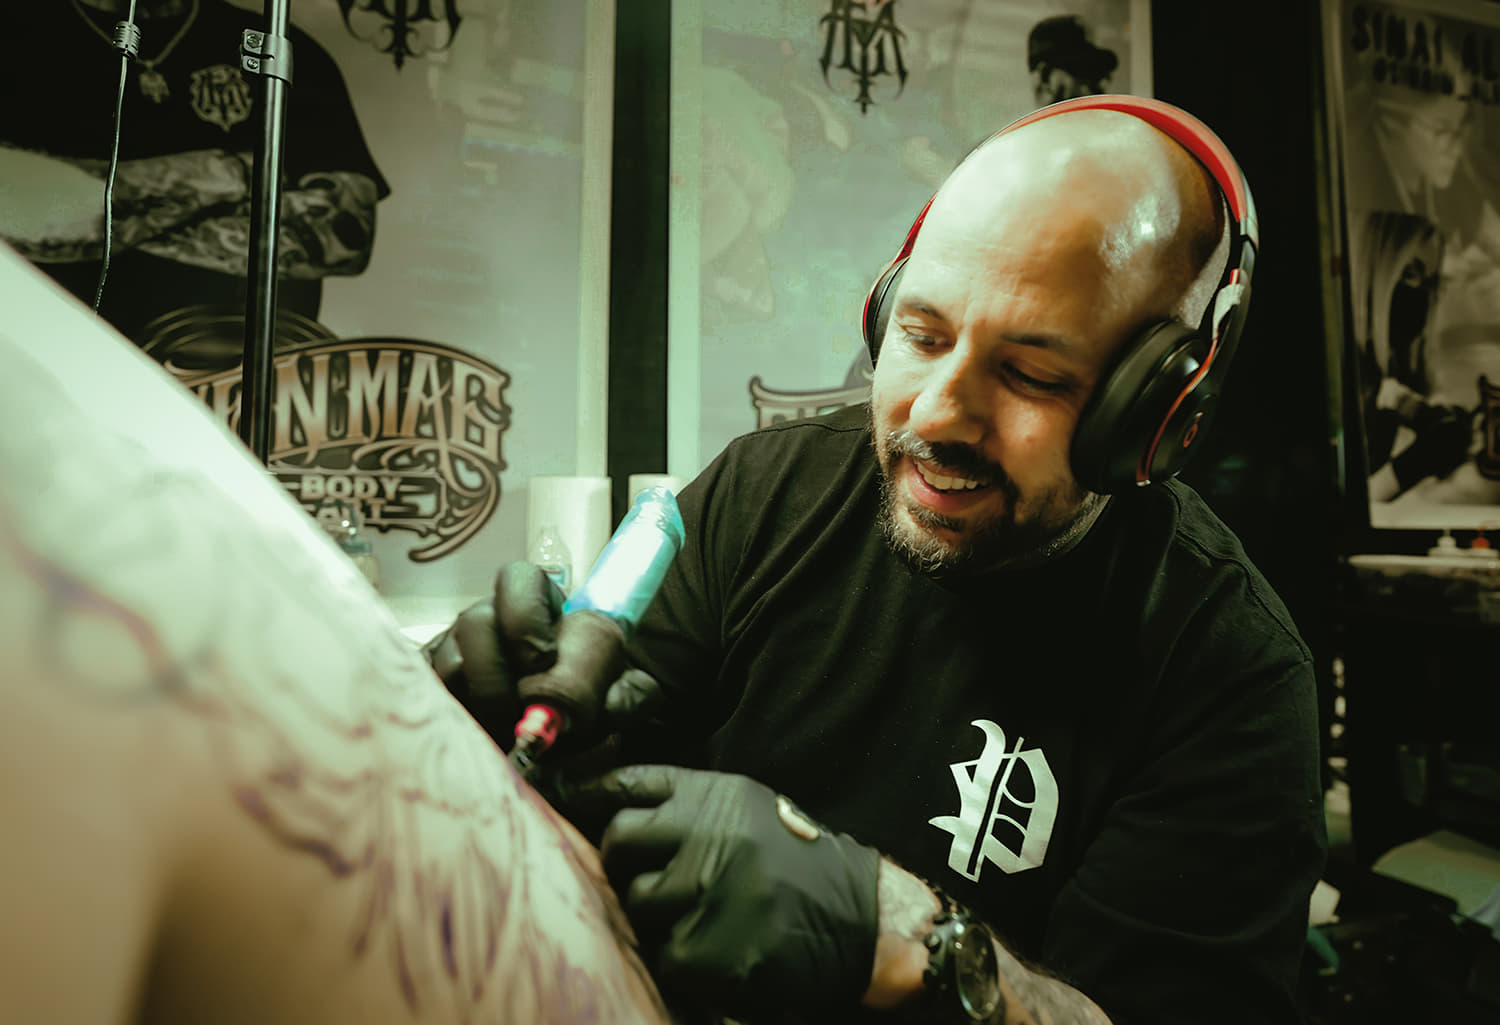 Jason Lawson is the owner of eleven mag tattoo shop in brentwood california photo copyright Adriana de Barros